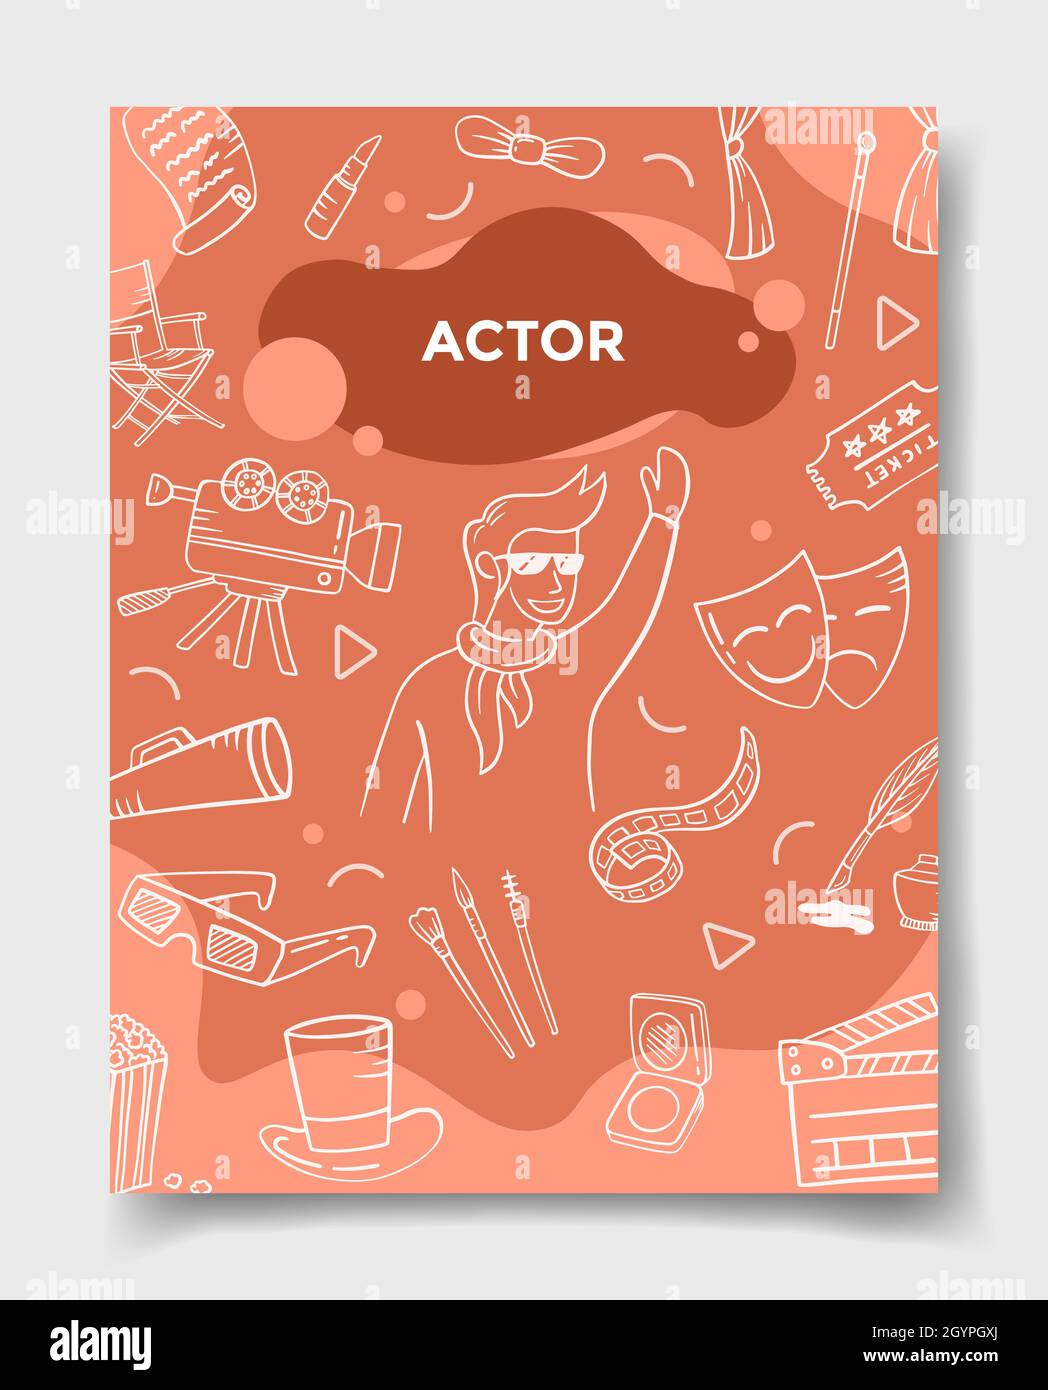 actor jobs or career profession with doodle style for template of banners, flyer, books, and magazine cover vector illustration Stock Photo